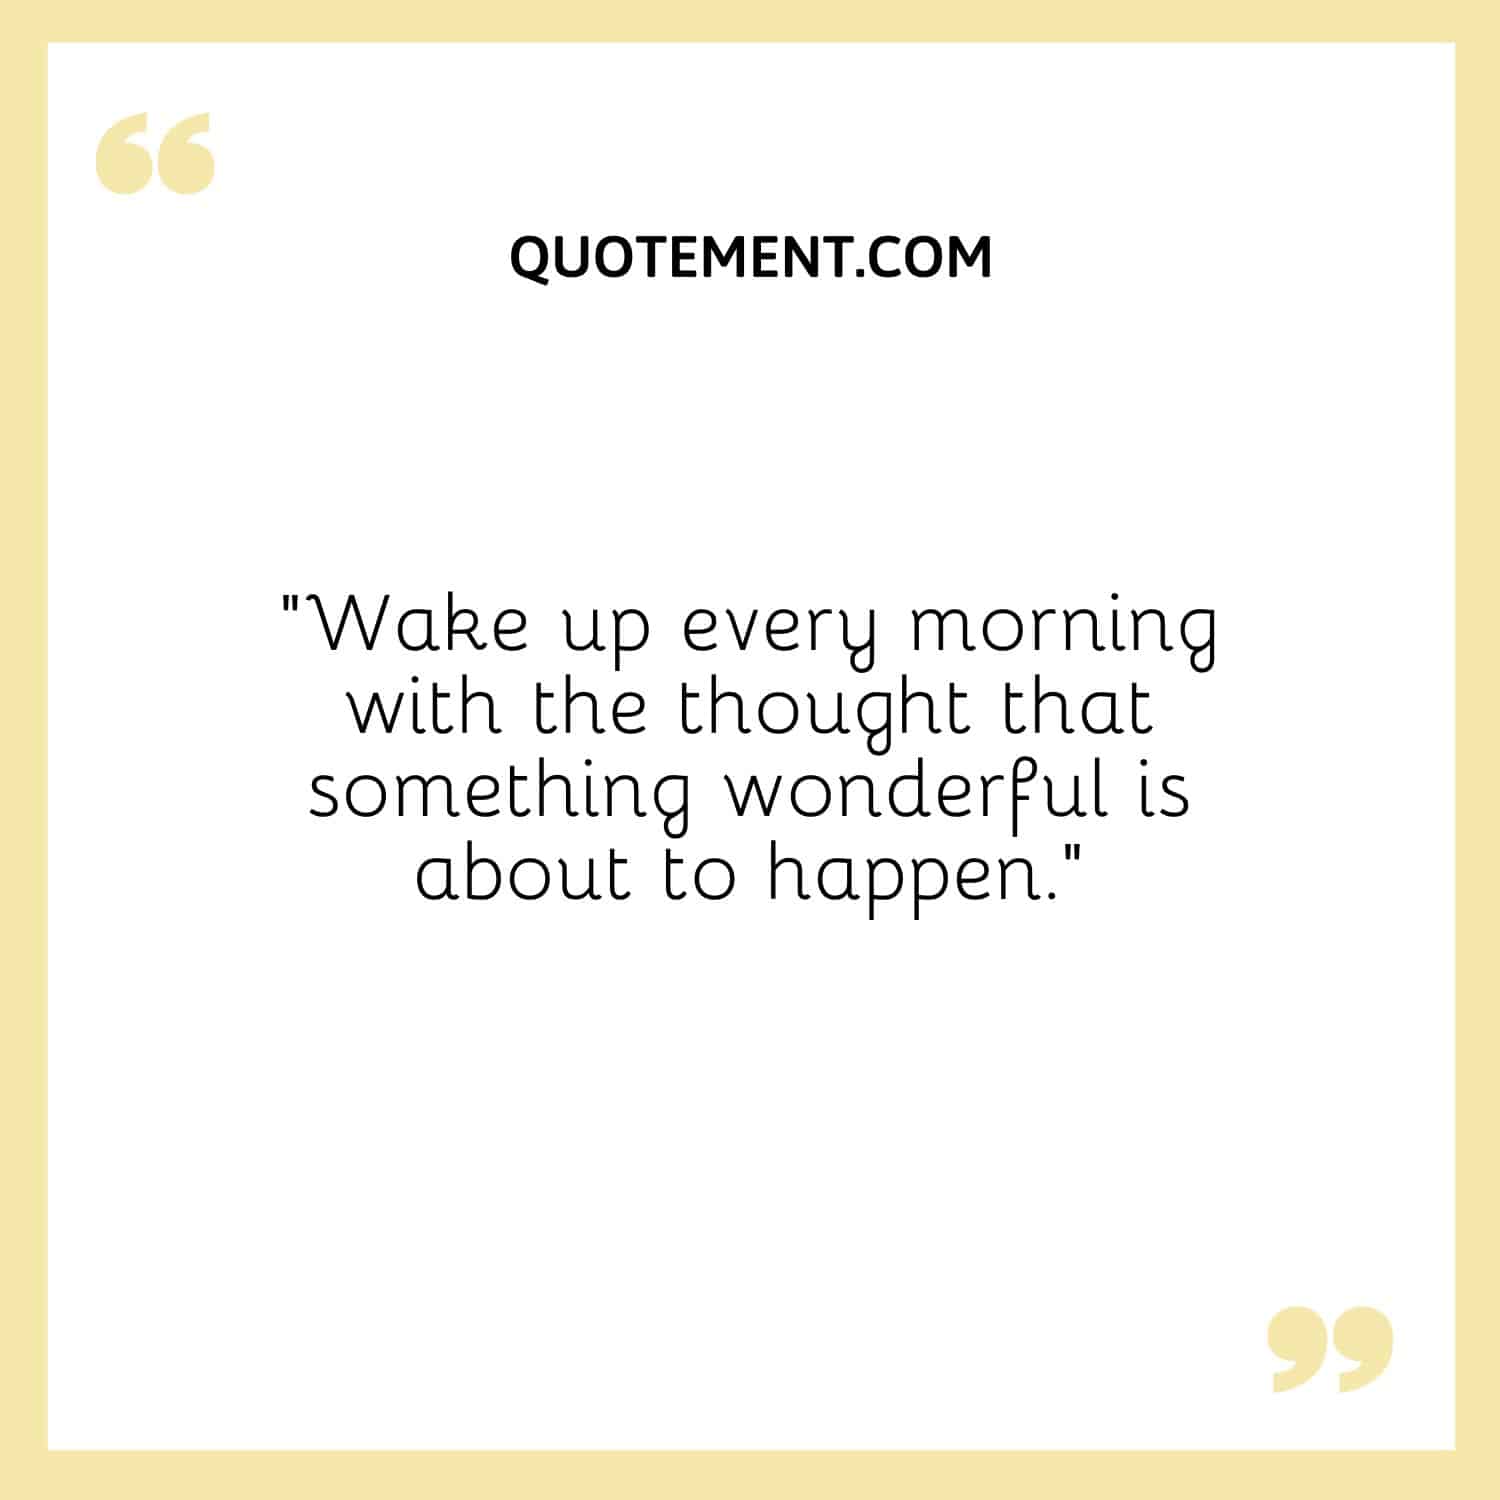 Wake up every morning with the thought that something wonderful is about to happen